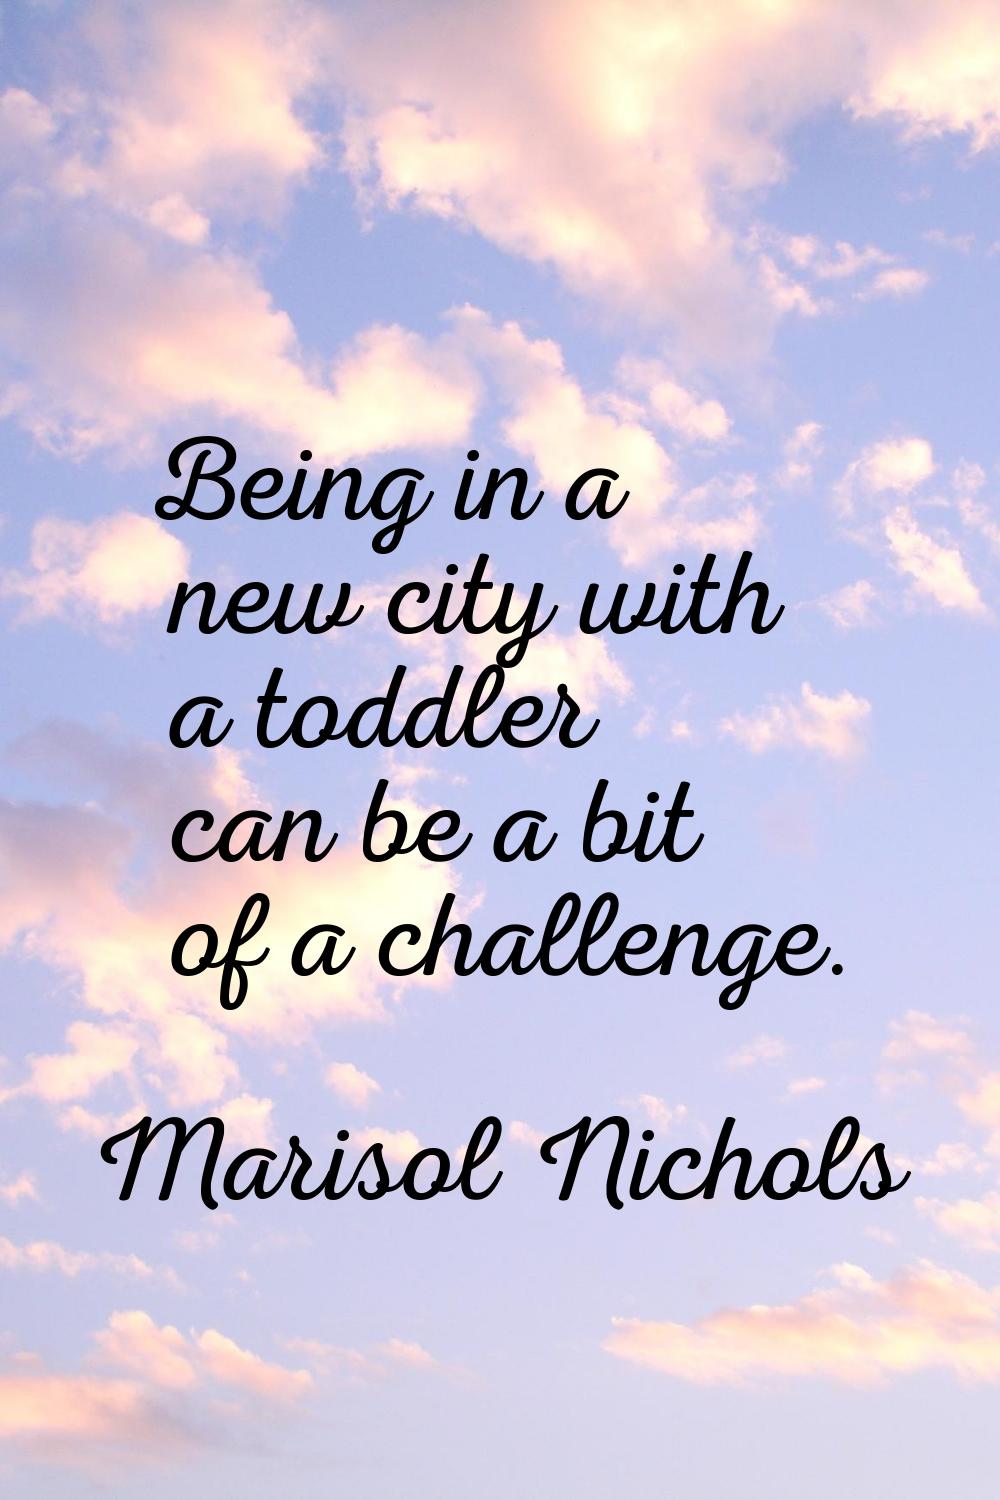 Being in a new city with a toddler can be a bit of a challenge.